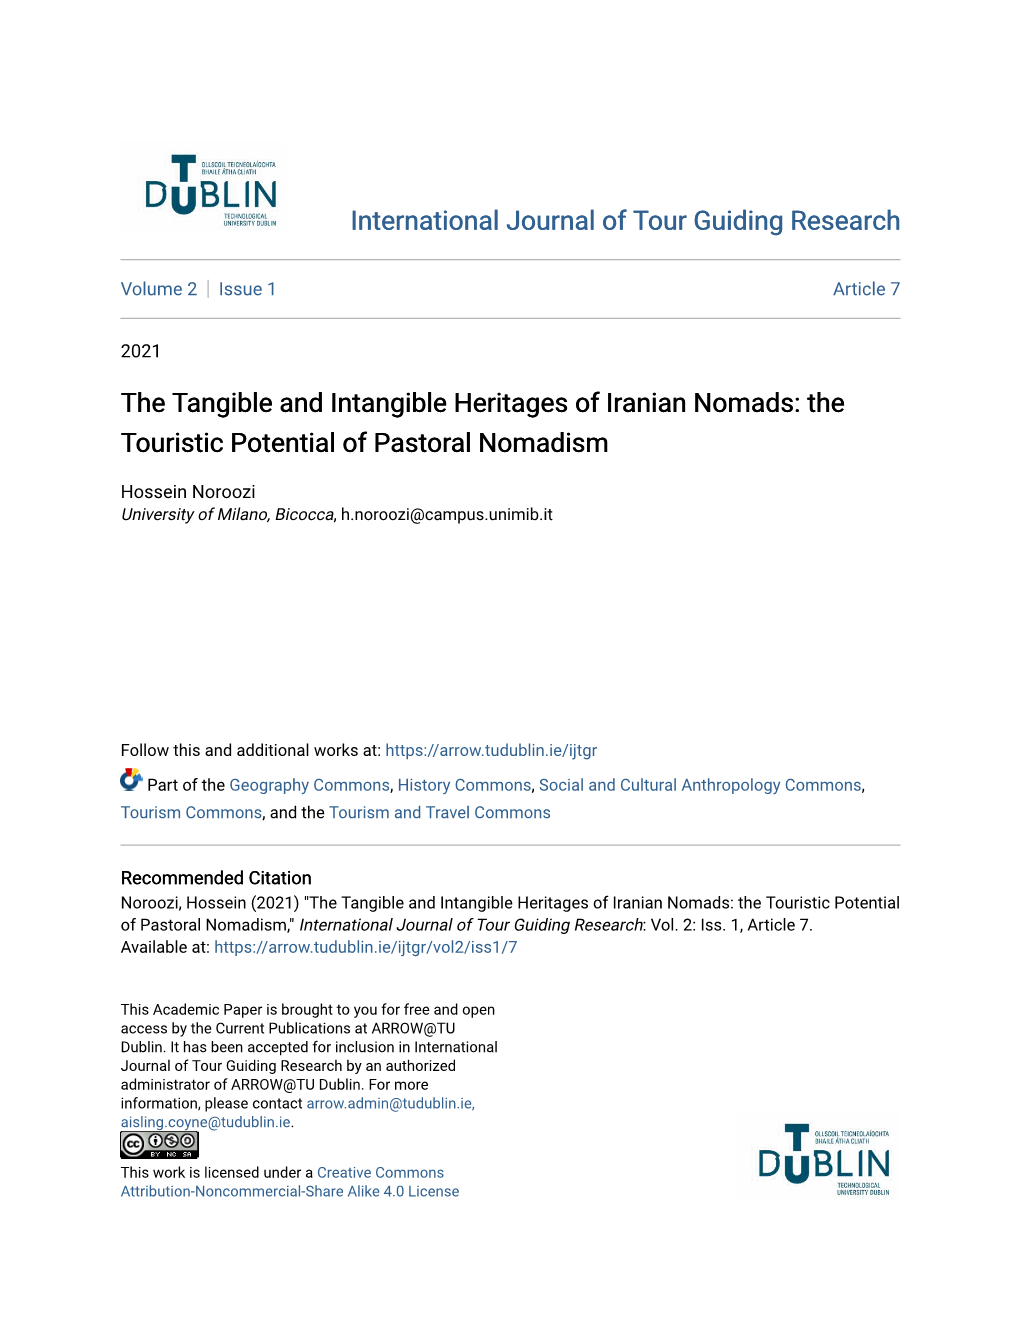 The Tangible and Intangible Heritages of Iranian Nomads: the Touristic Potential of Pastoral Nomadism